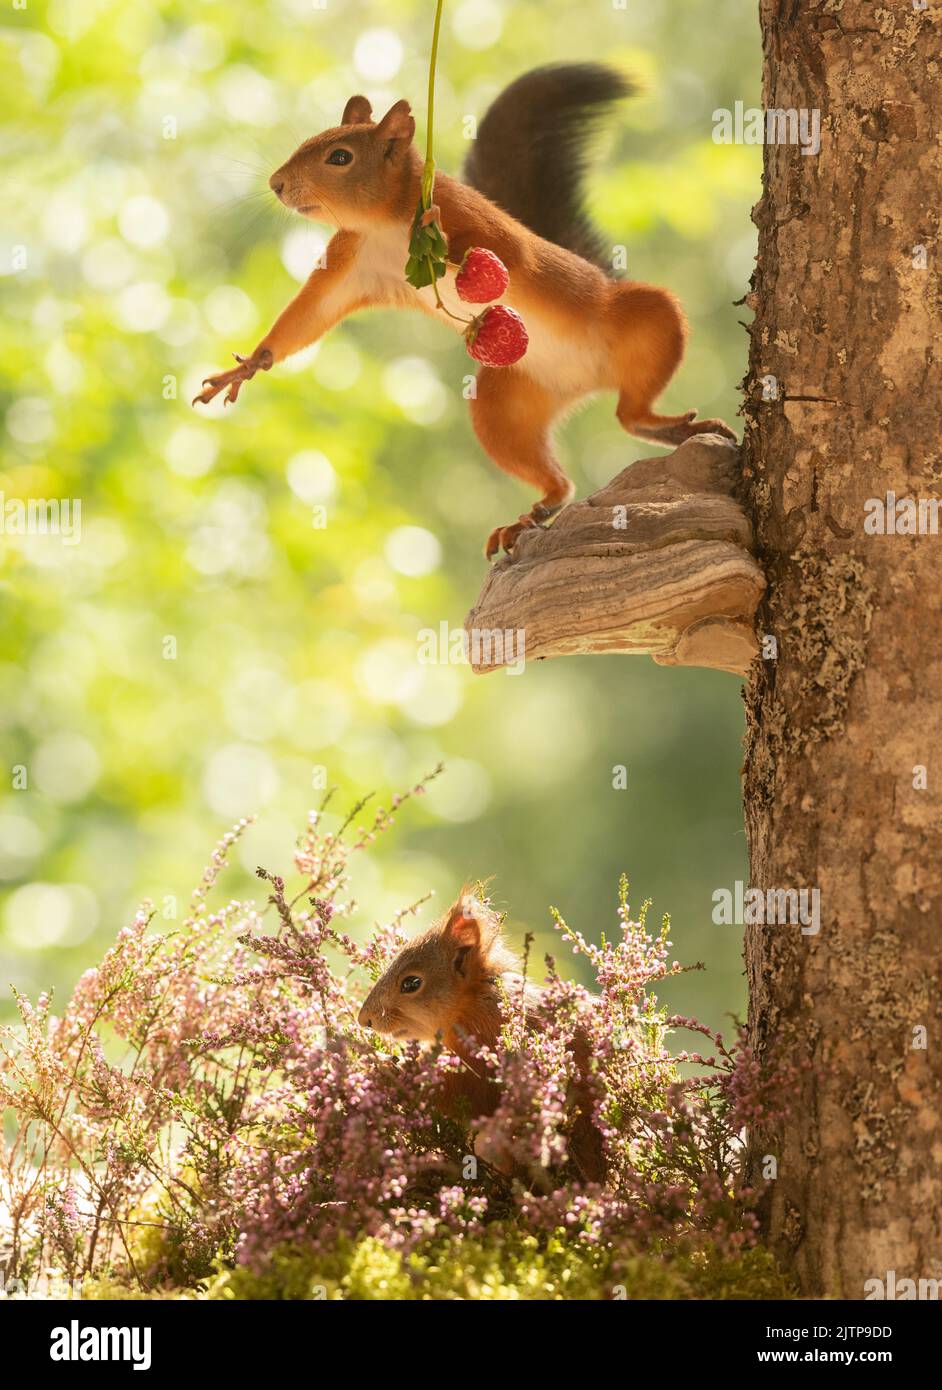 red squirrel is holding strawberries Stock Photo